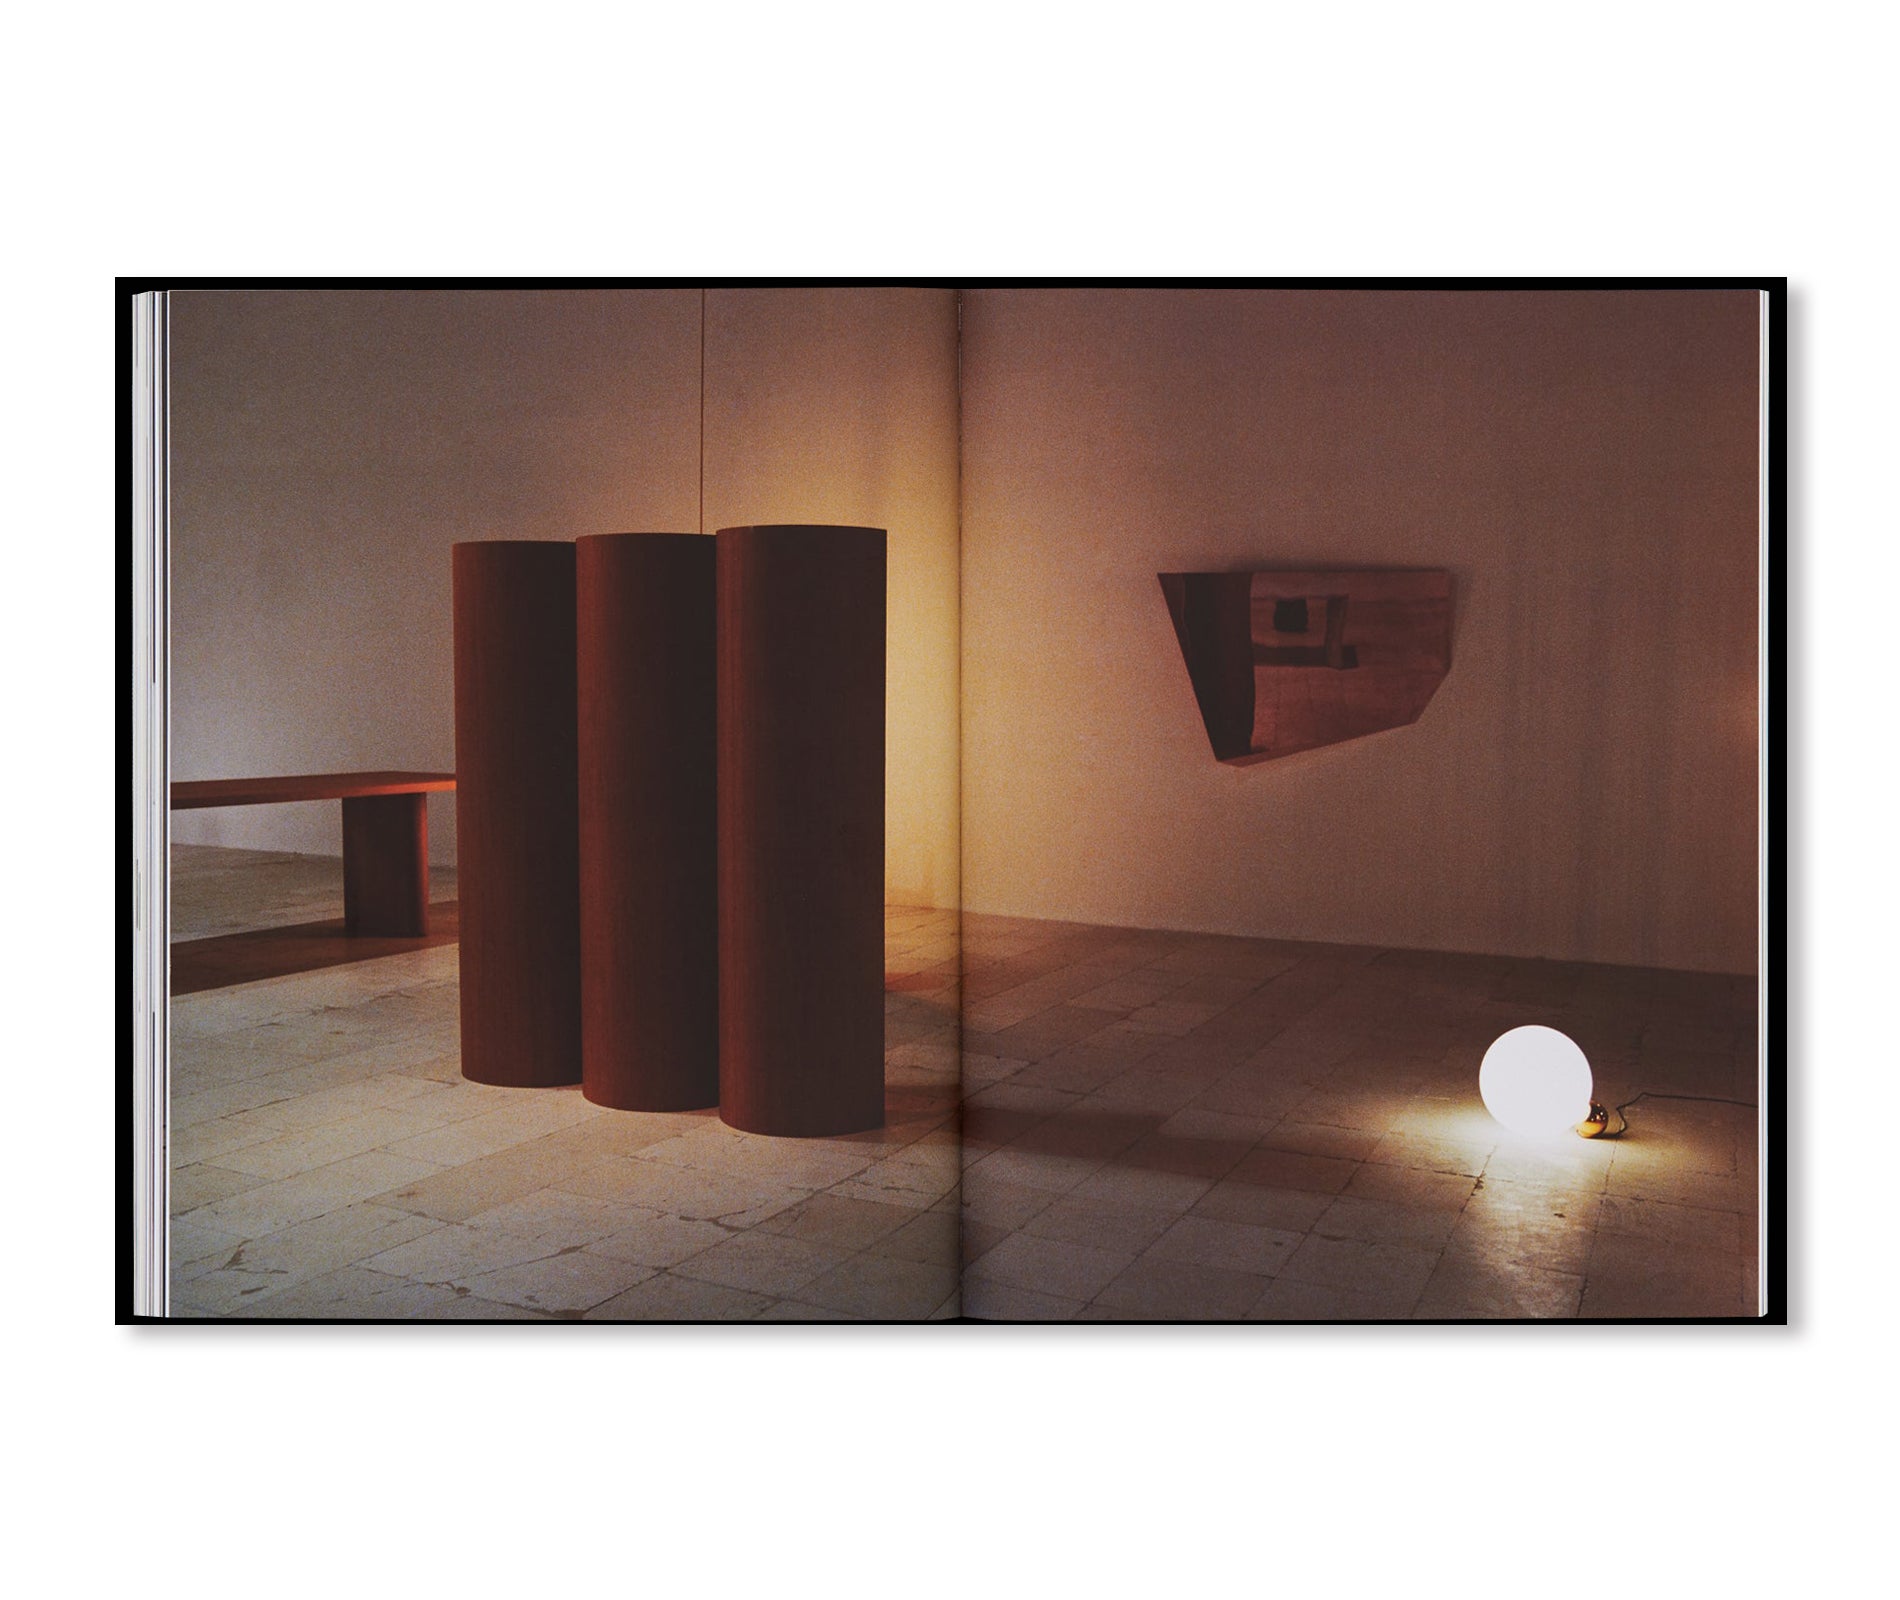 THINGS THAT GO TOGETHER by Michael Anastassiades [SOFTCOVER]